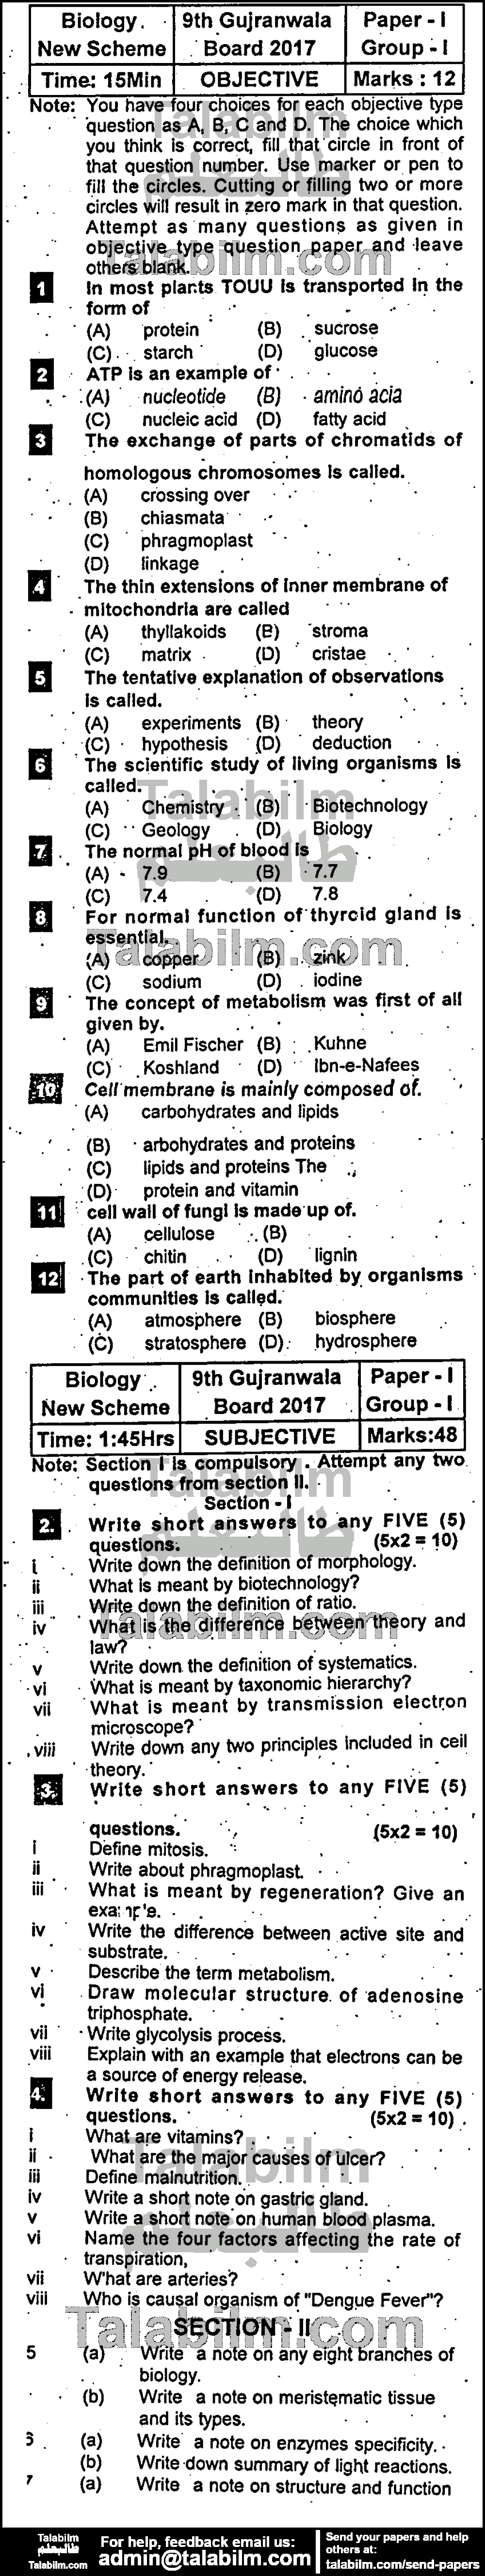 Biology 0 past paper for English Medium 2017 Group-I